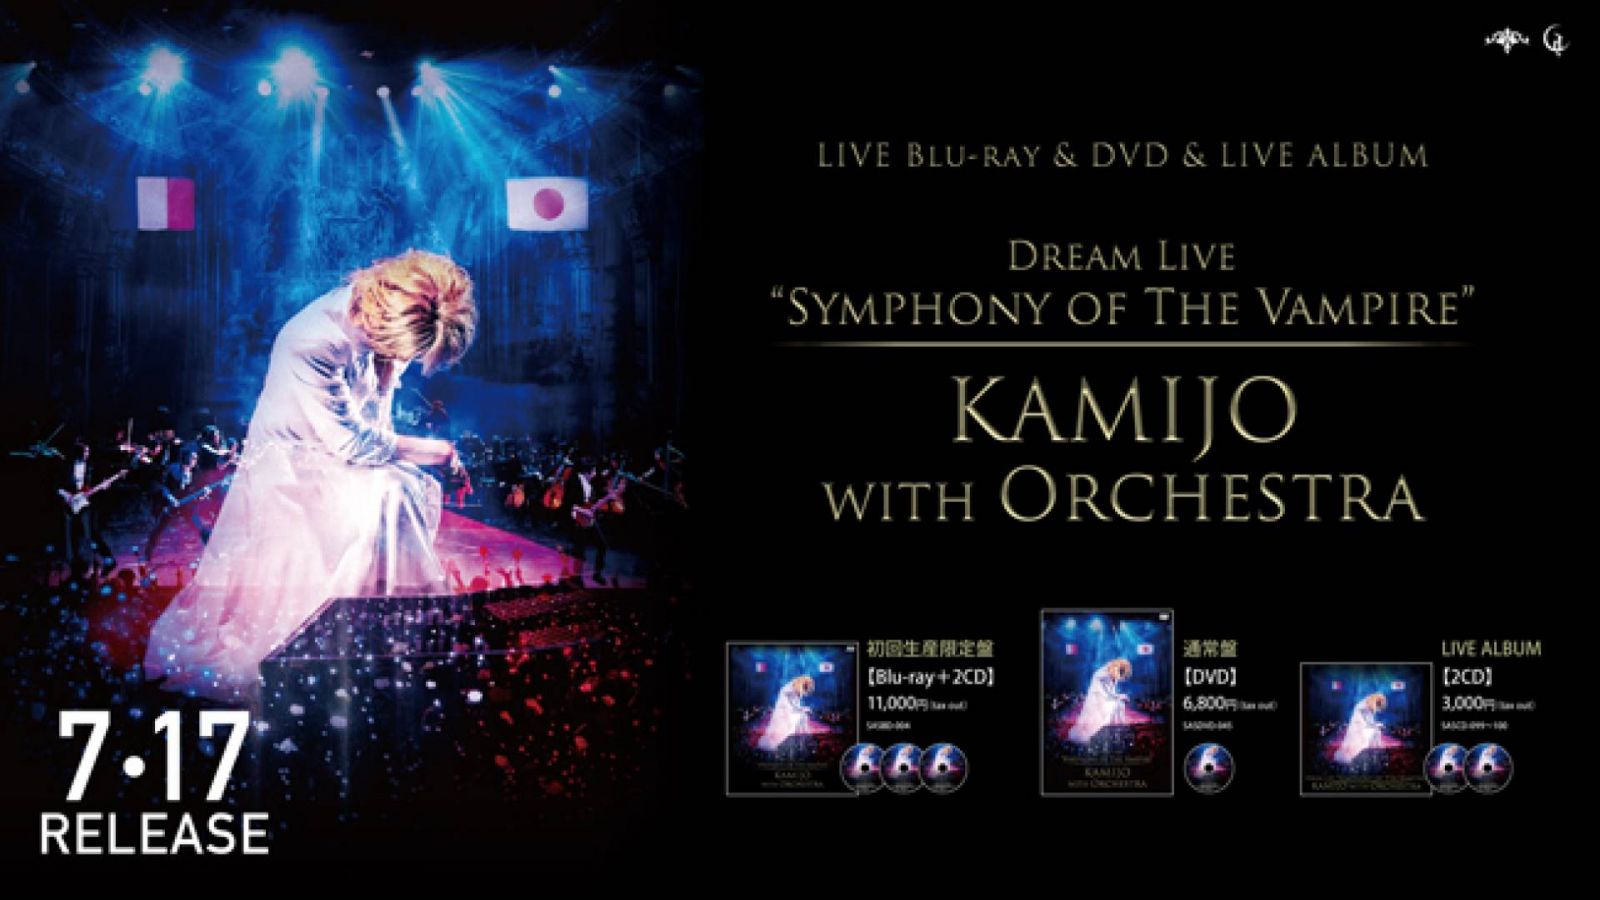 DVD de Dream Live “Symphony of The Vampire” KAMIJO with Orchestra © CHATEAU AGENCY CO., Ltd. All rights reserved.